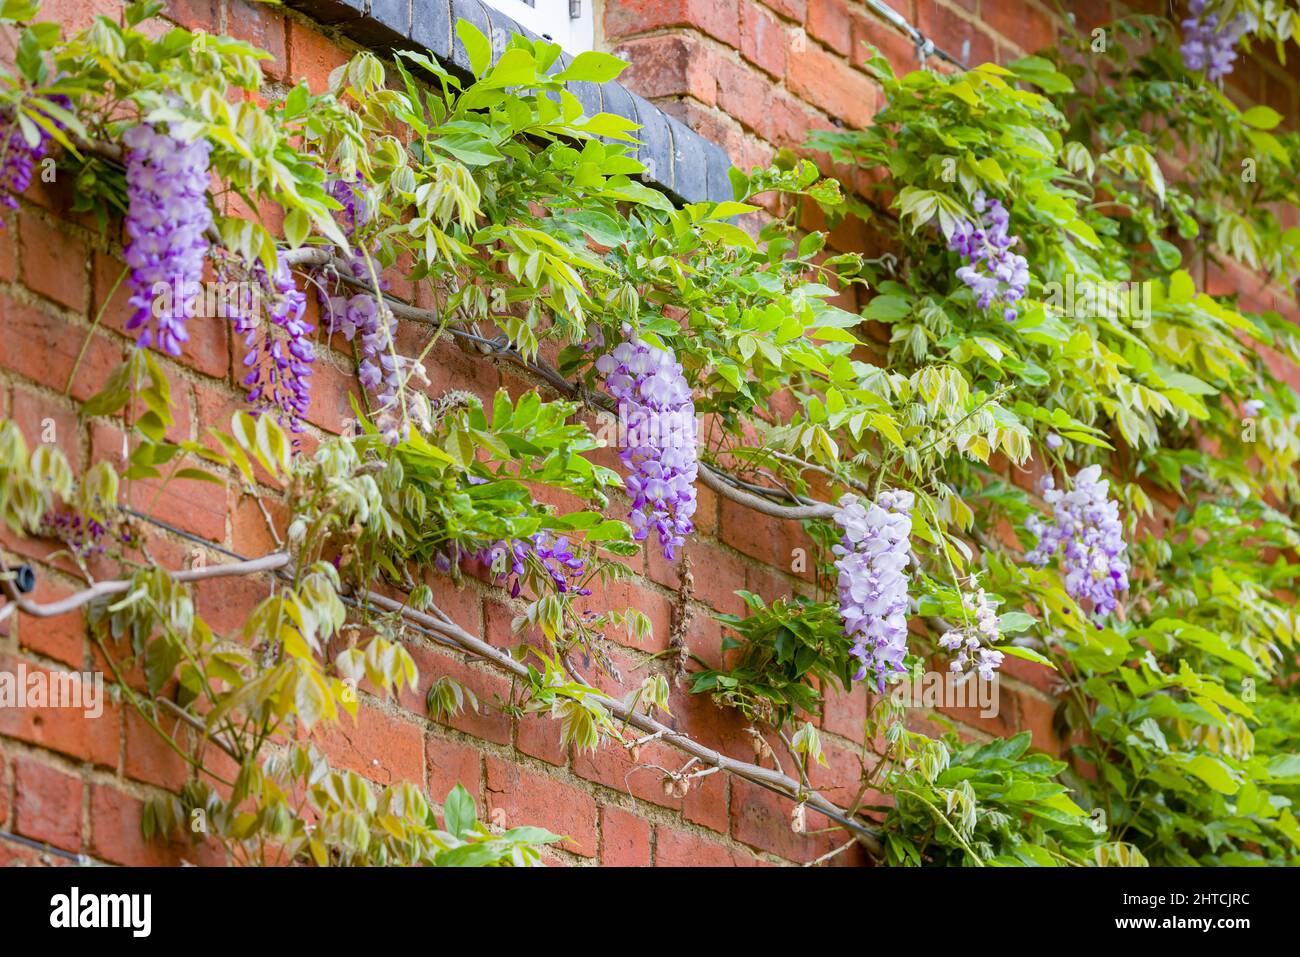 Wisteria plant growing on house wall in spring, UK. Climbing vines supported with vine eyes and wire rope. Stock Photo